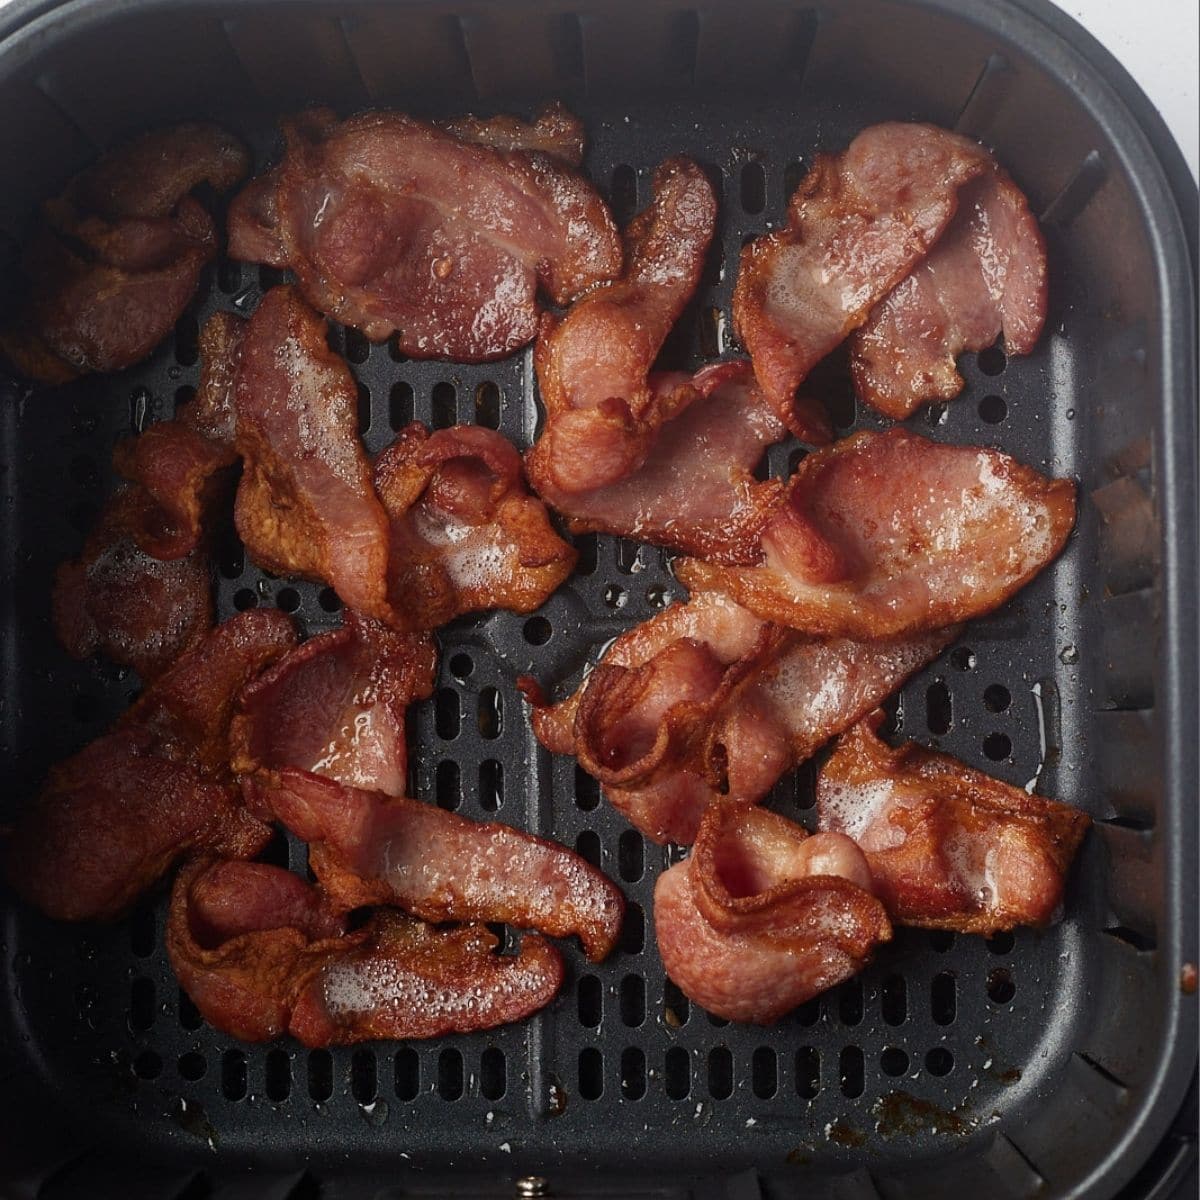 Air Fryer Bacon  The Complete Guide to Air Frying Bacon